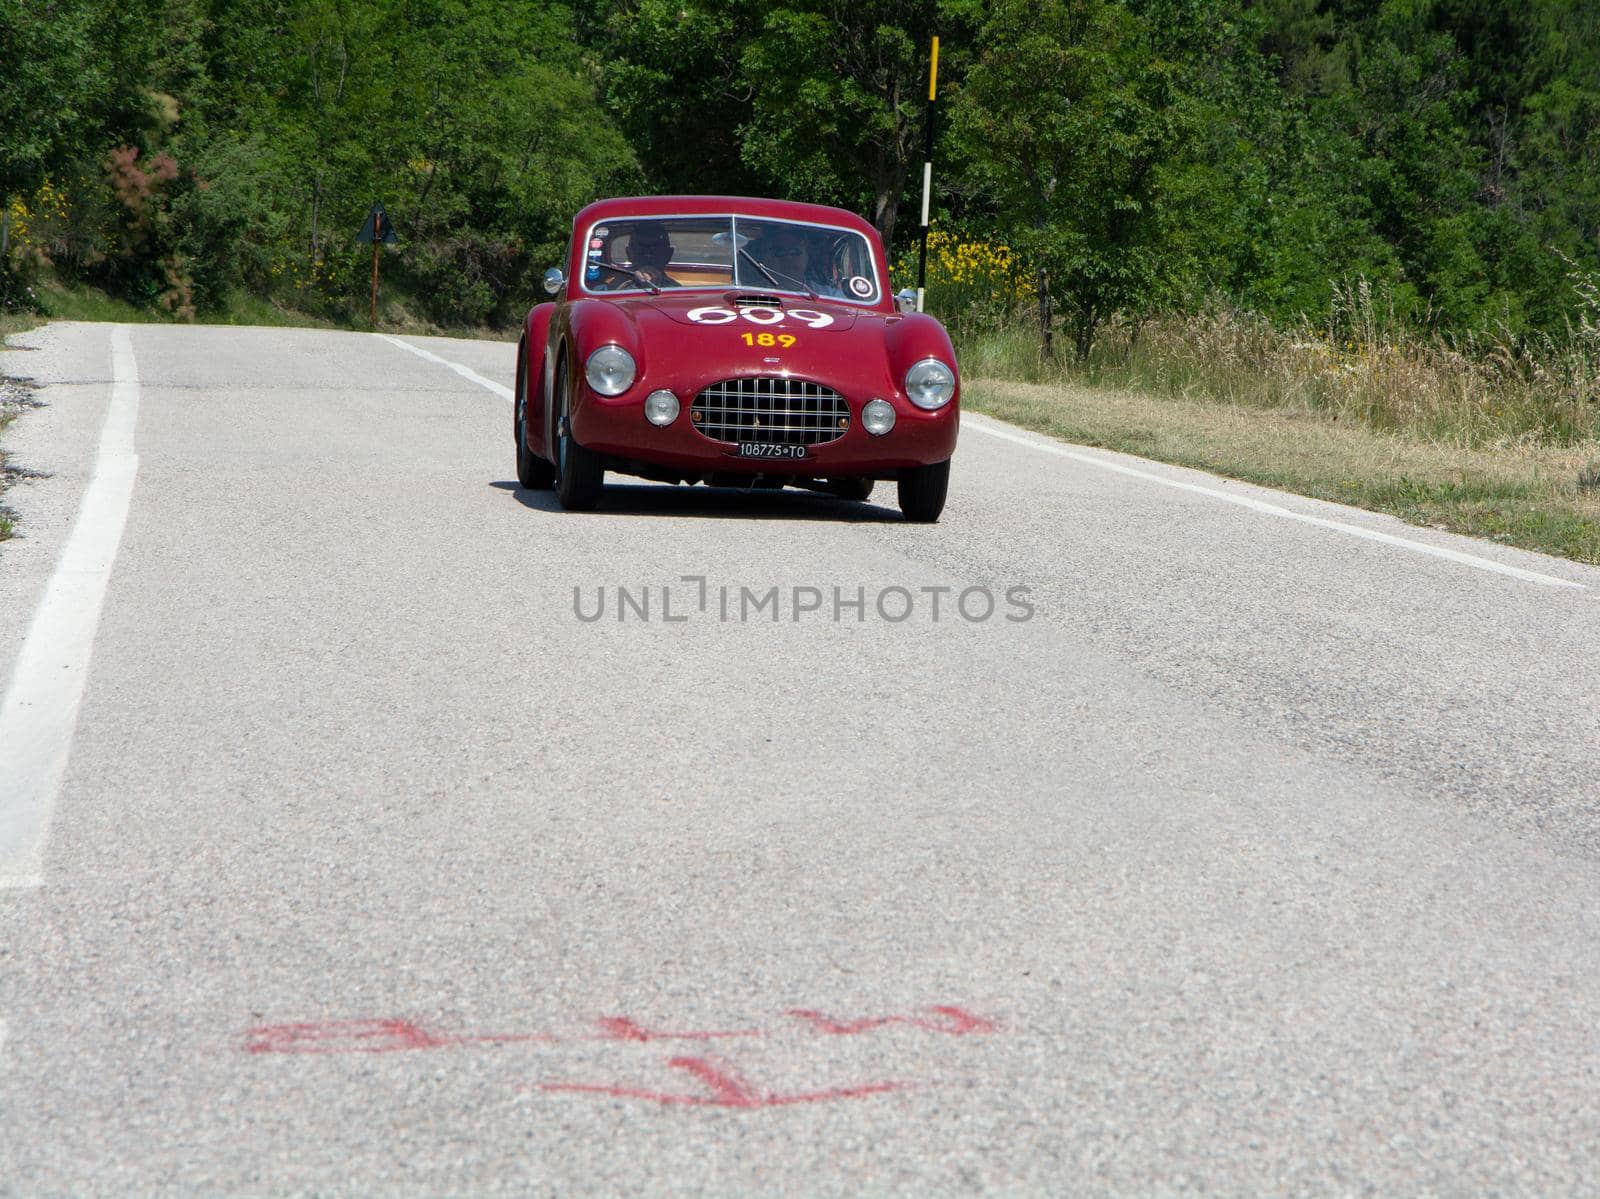 ERMINI 1100 BERLINETTA MOTTO 1950 on an old racing car in rally Mille Miglia 2022 the famous italian historical race (1927-1957 by massimocampanari